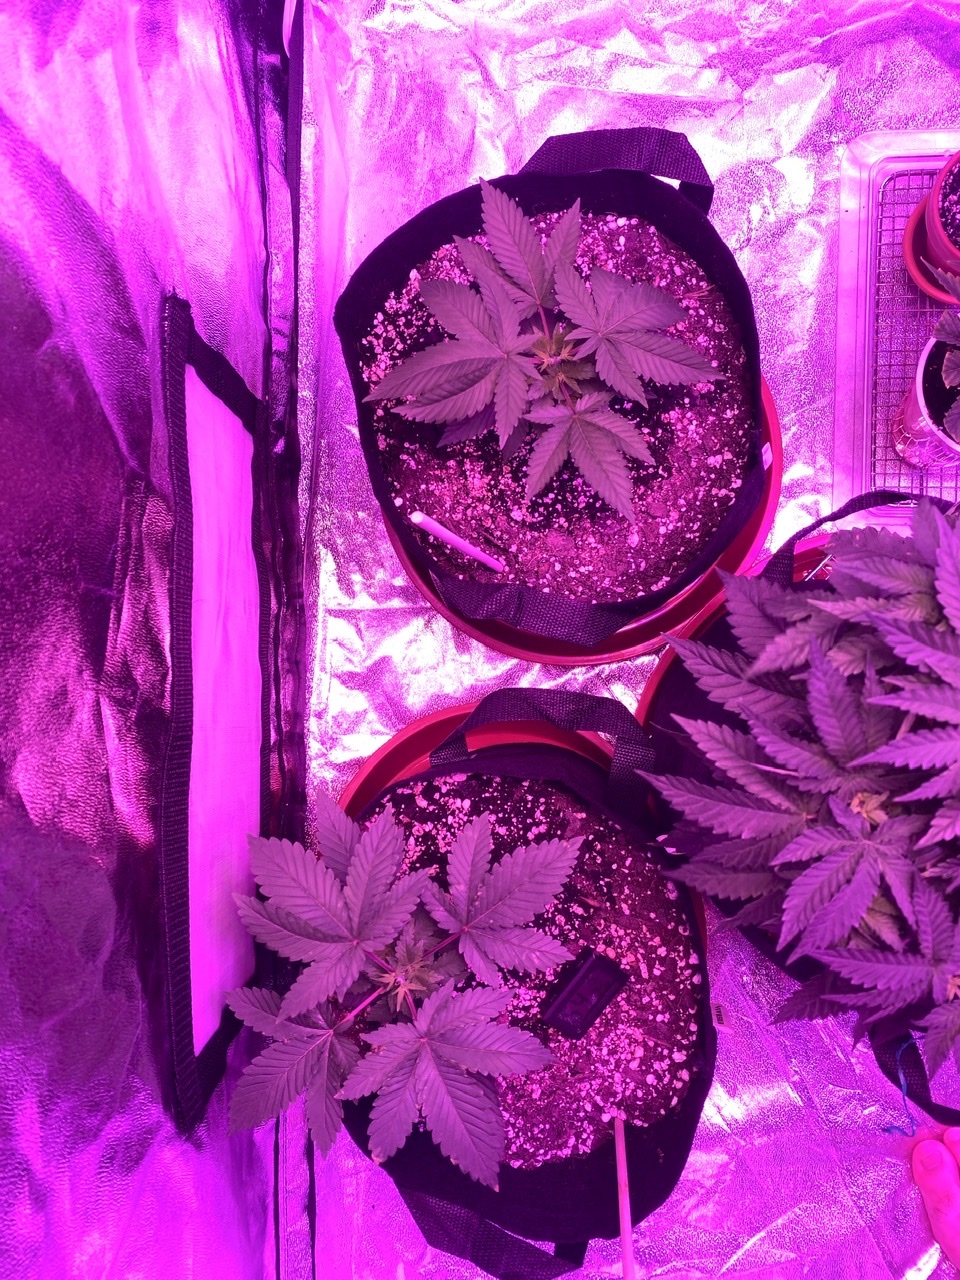 Quick update after lst and feedings thanks for all the knowledge ive found here happy growing